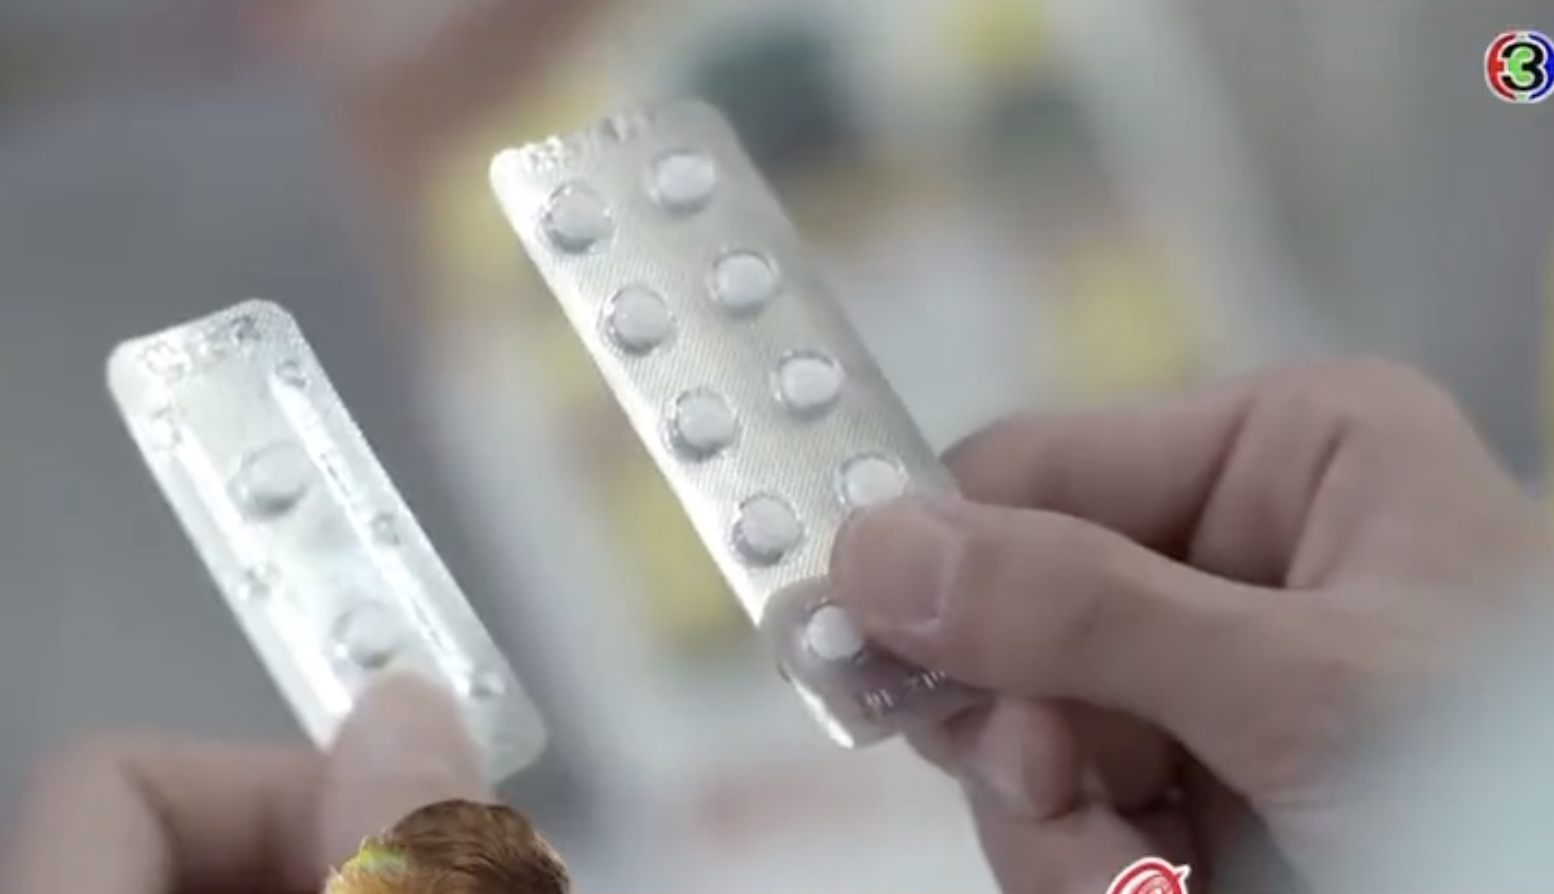 Nausea pills won’t stop pregnancy, concerned Thai pharmacists tell TV